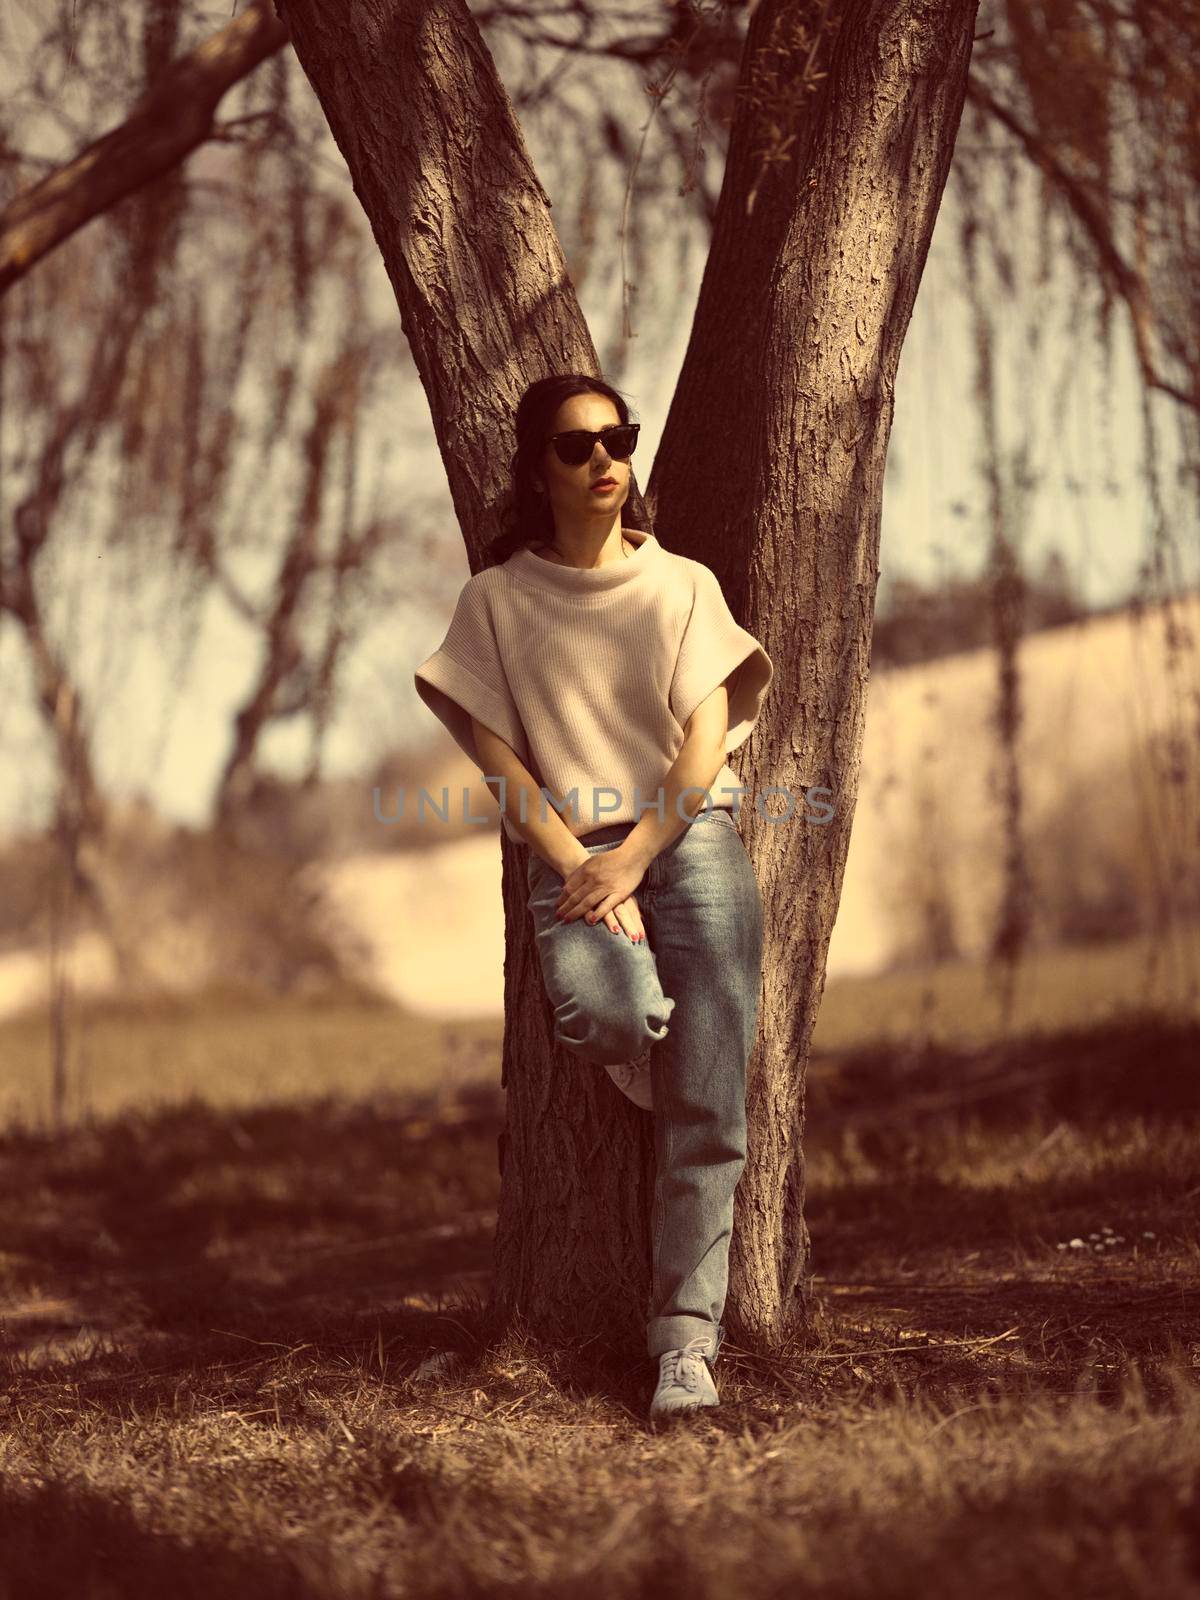 Fashion woman outdoor in spring scenery by drmglc